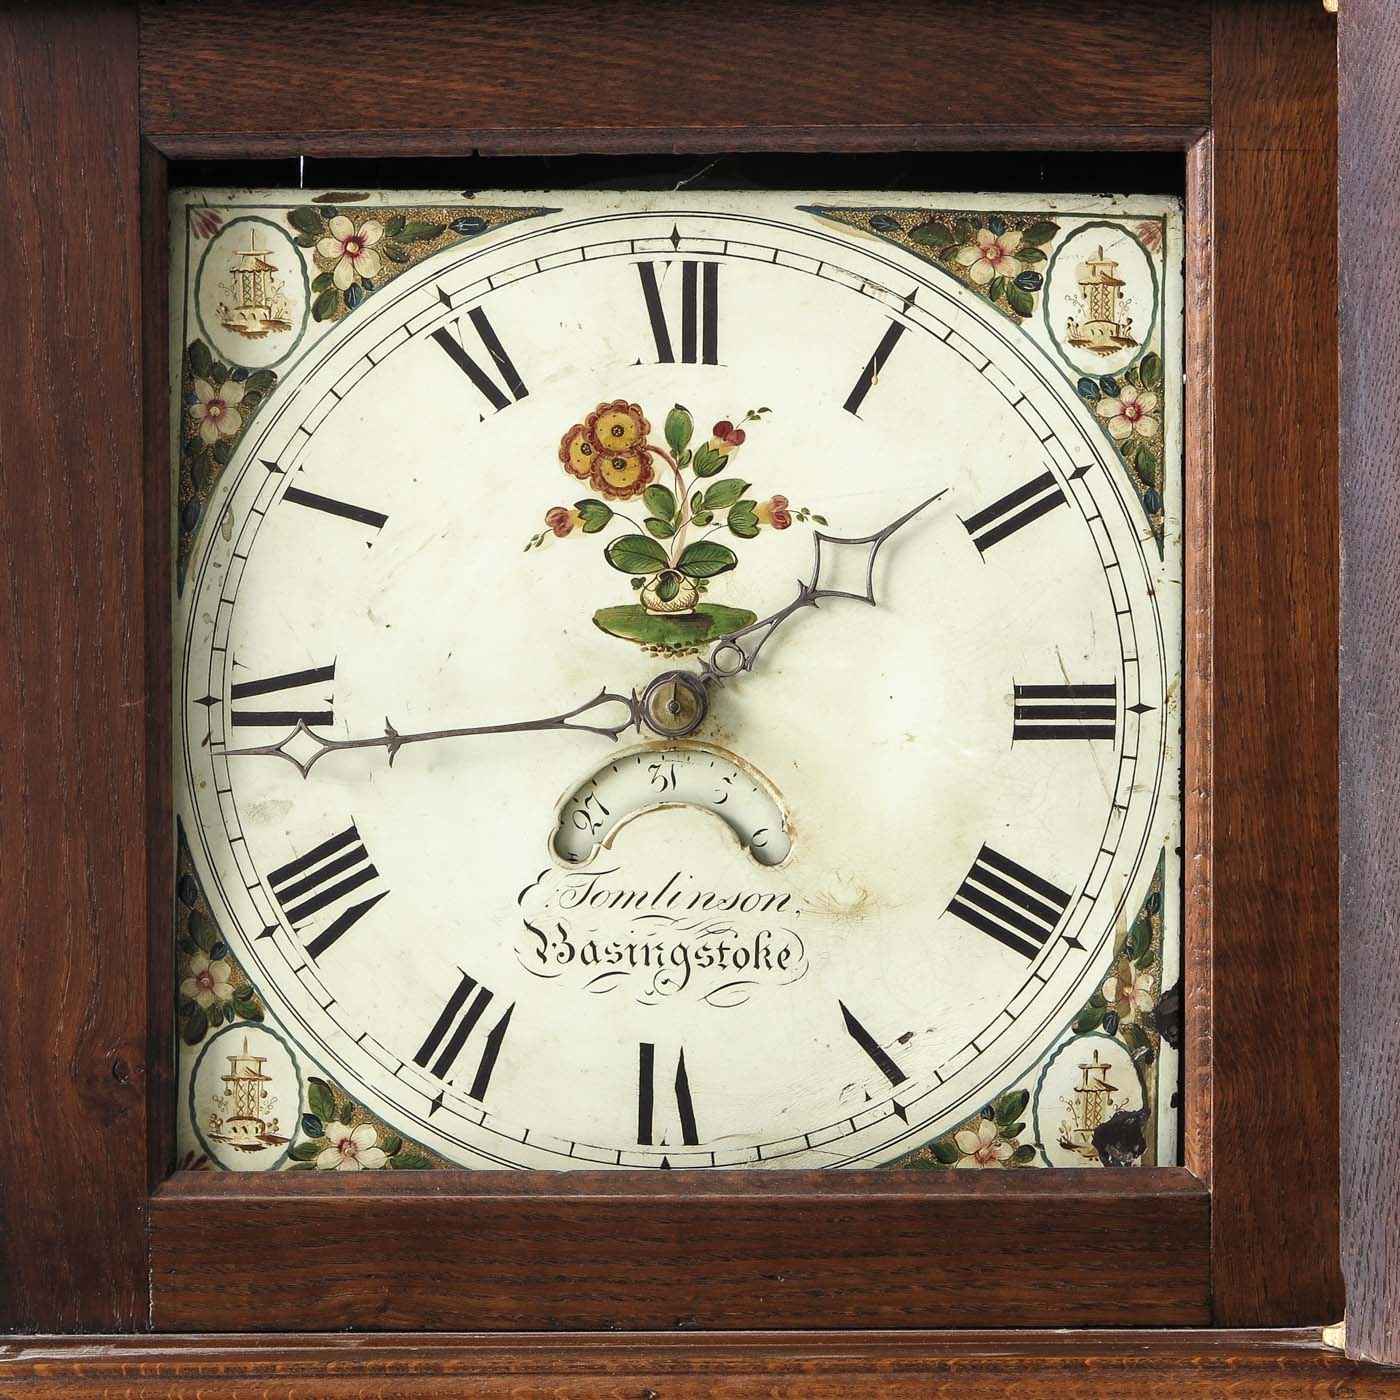 An English Standing Clock - Image 2 of 2